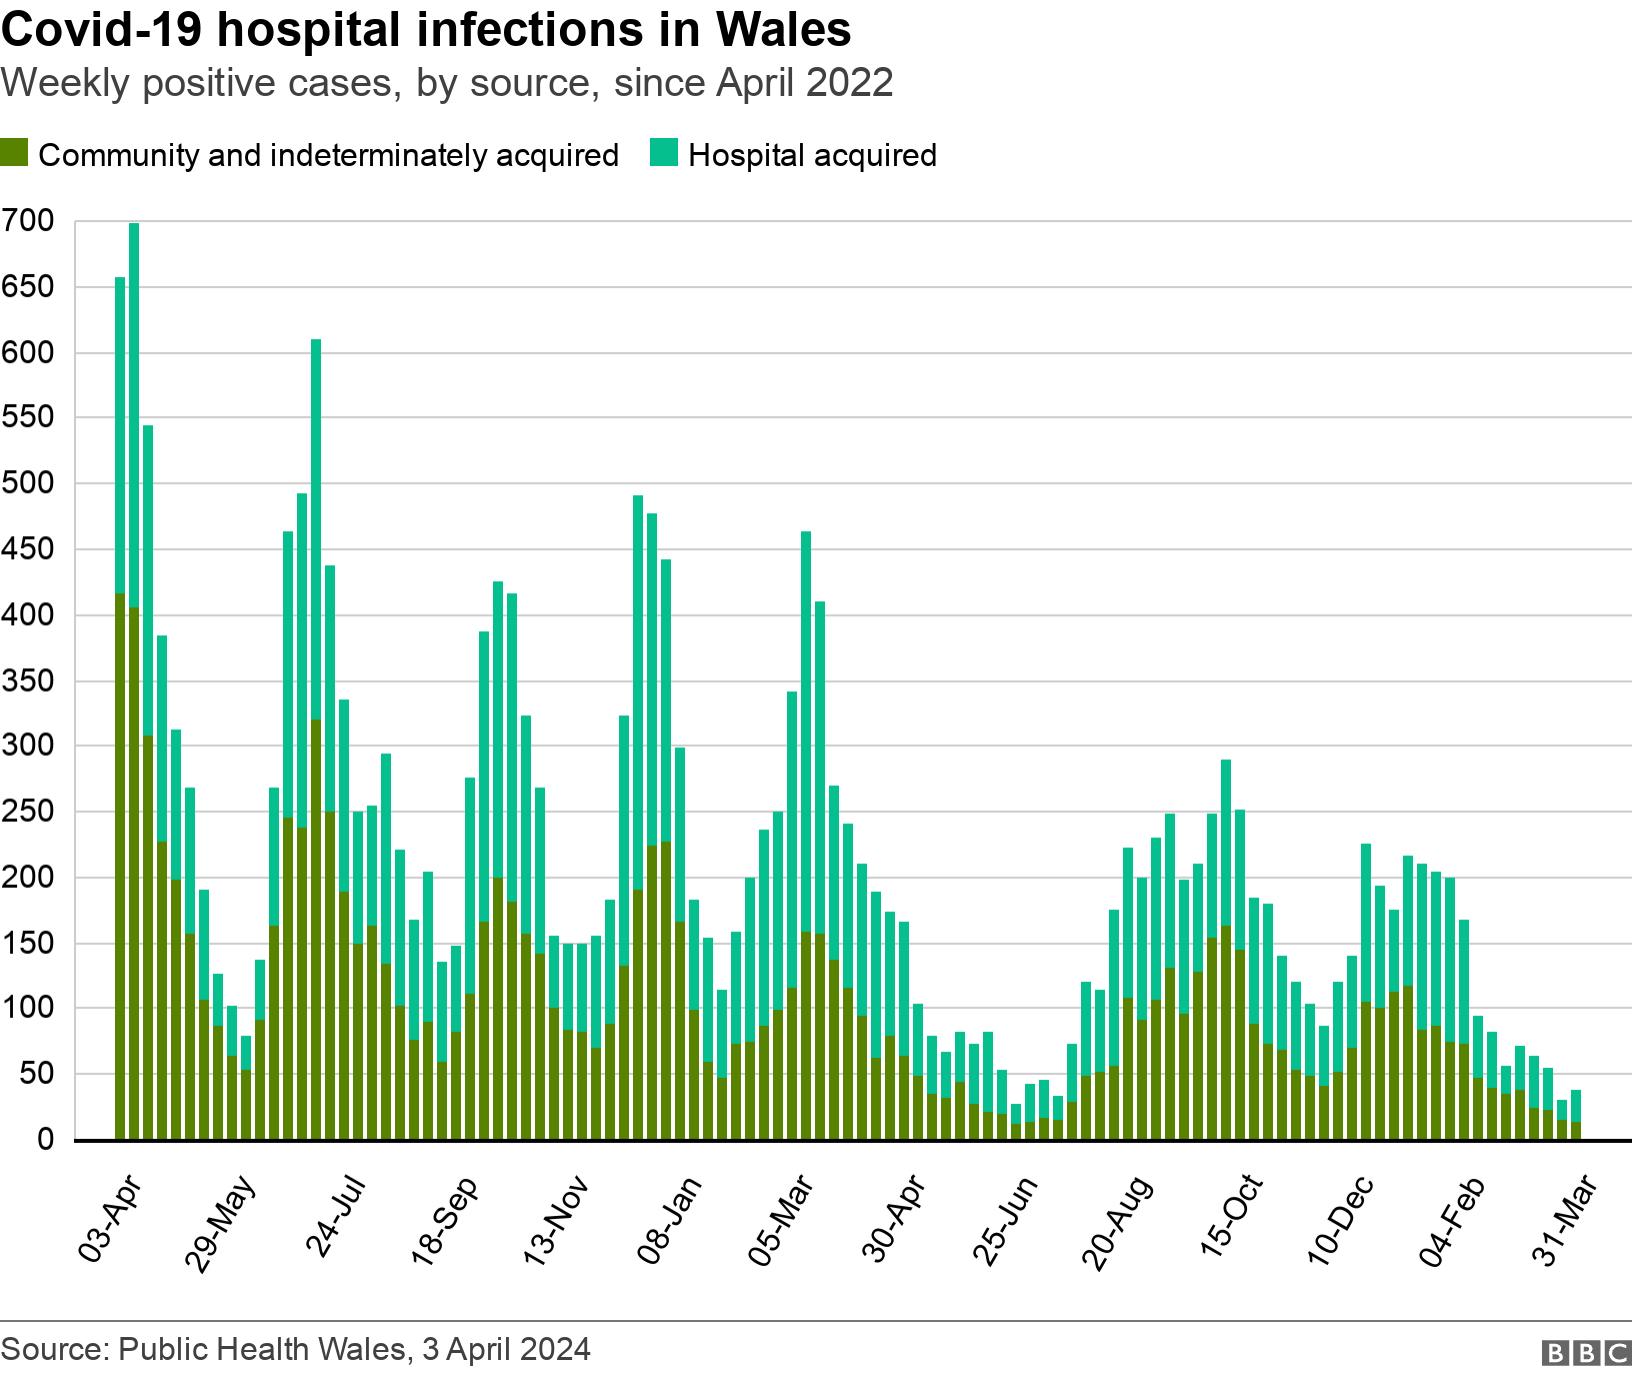 Covid-19 hospital infections in Wales. Weekly positive cases, by source, since April 2022.  .